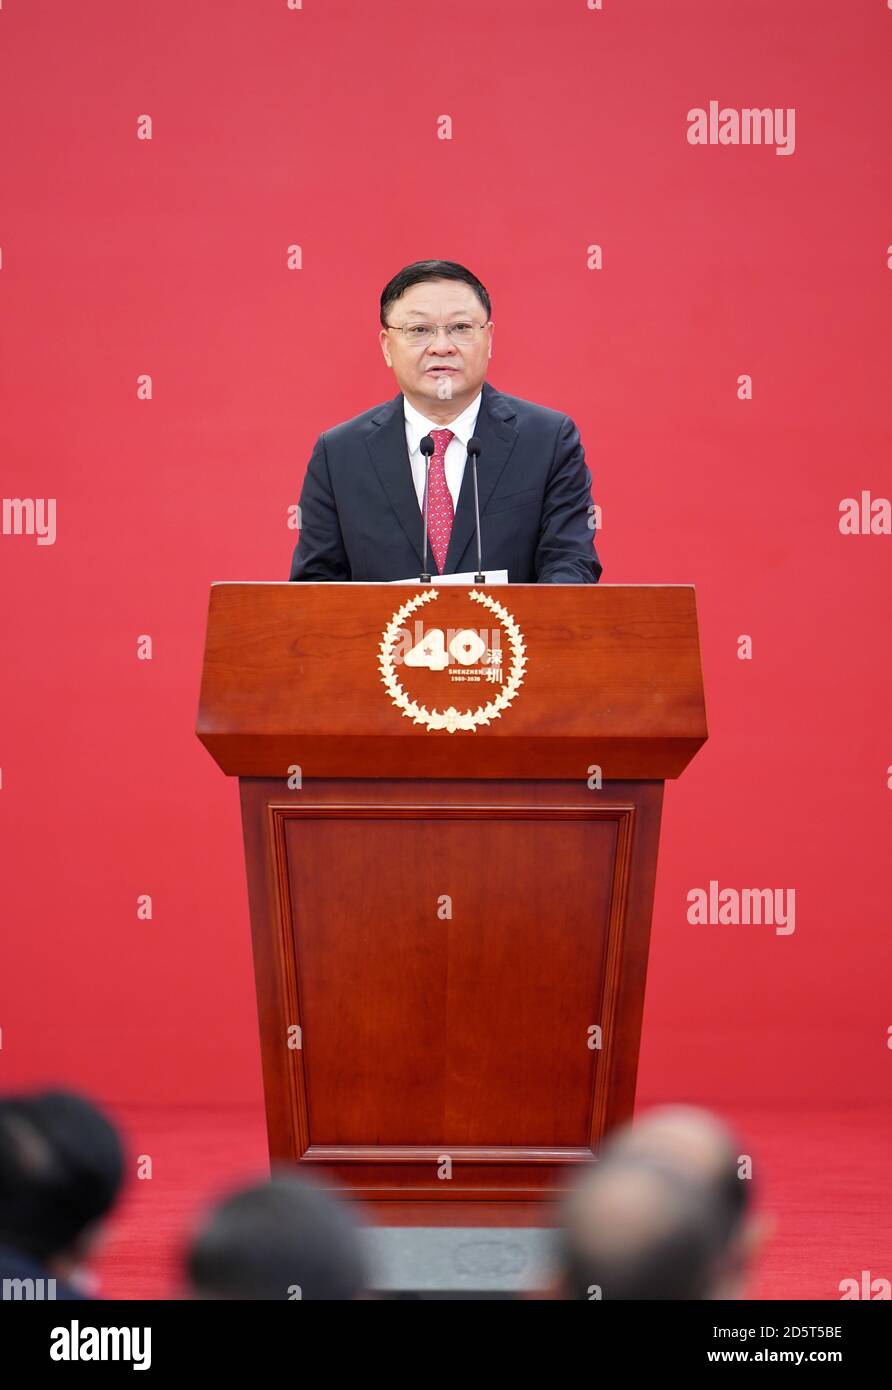 Shenzhen, China's Guangdong Province. 14th Oct, 2020. Wang Weizhong, secretary of the Shenzhen Municipal Committee of the Communist Party of China, speaks at a grand gathering held to celebrate the 40th anniversary of the establishment of the Shenzhen Special Economic Zone in Shenzhen, south China's Guangdong Province, Oct. 14, 2020. Credit: Zhang Ling/Xinhua/Alamy Live News Stock Photo